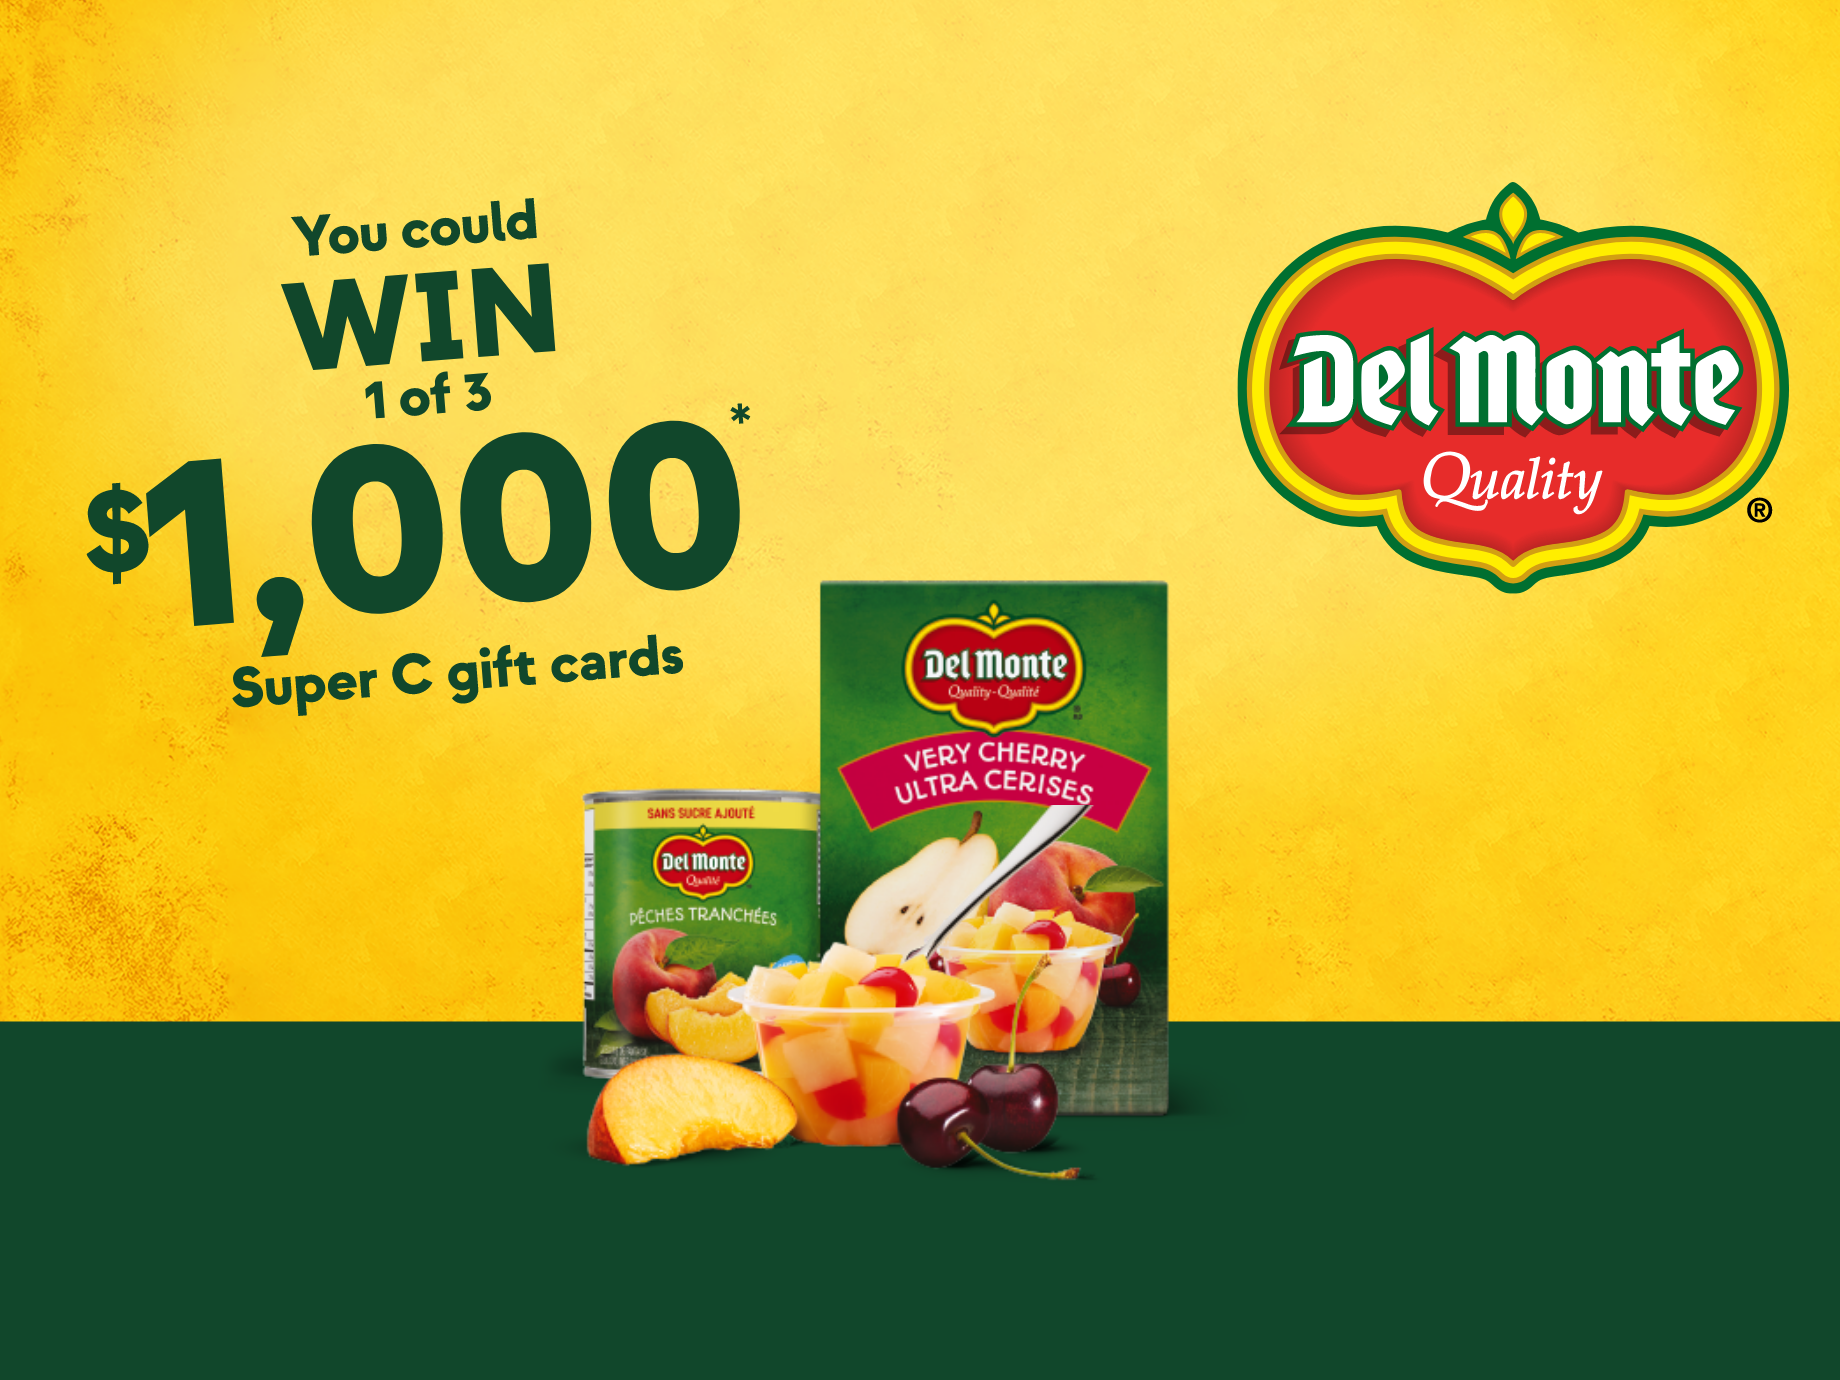 You could WIN 1 of 3 $1,000* Super C gift cards